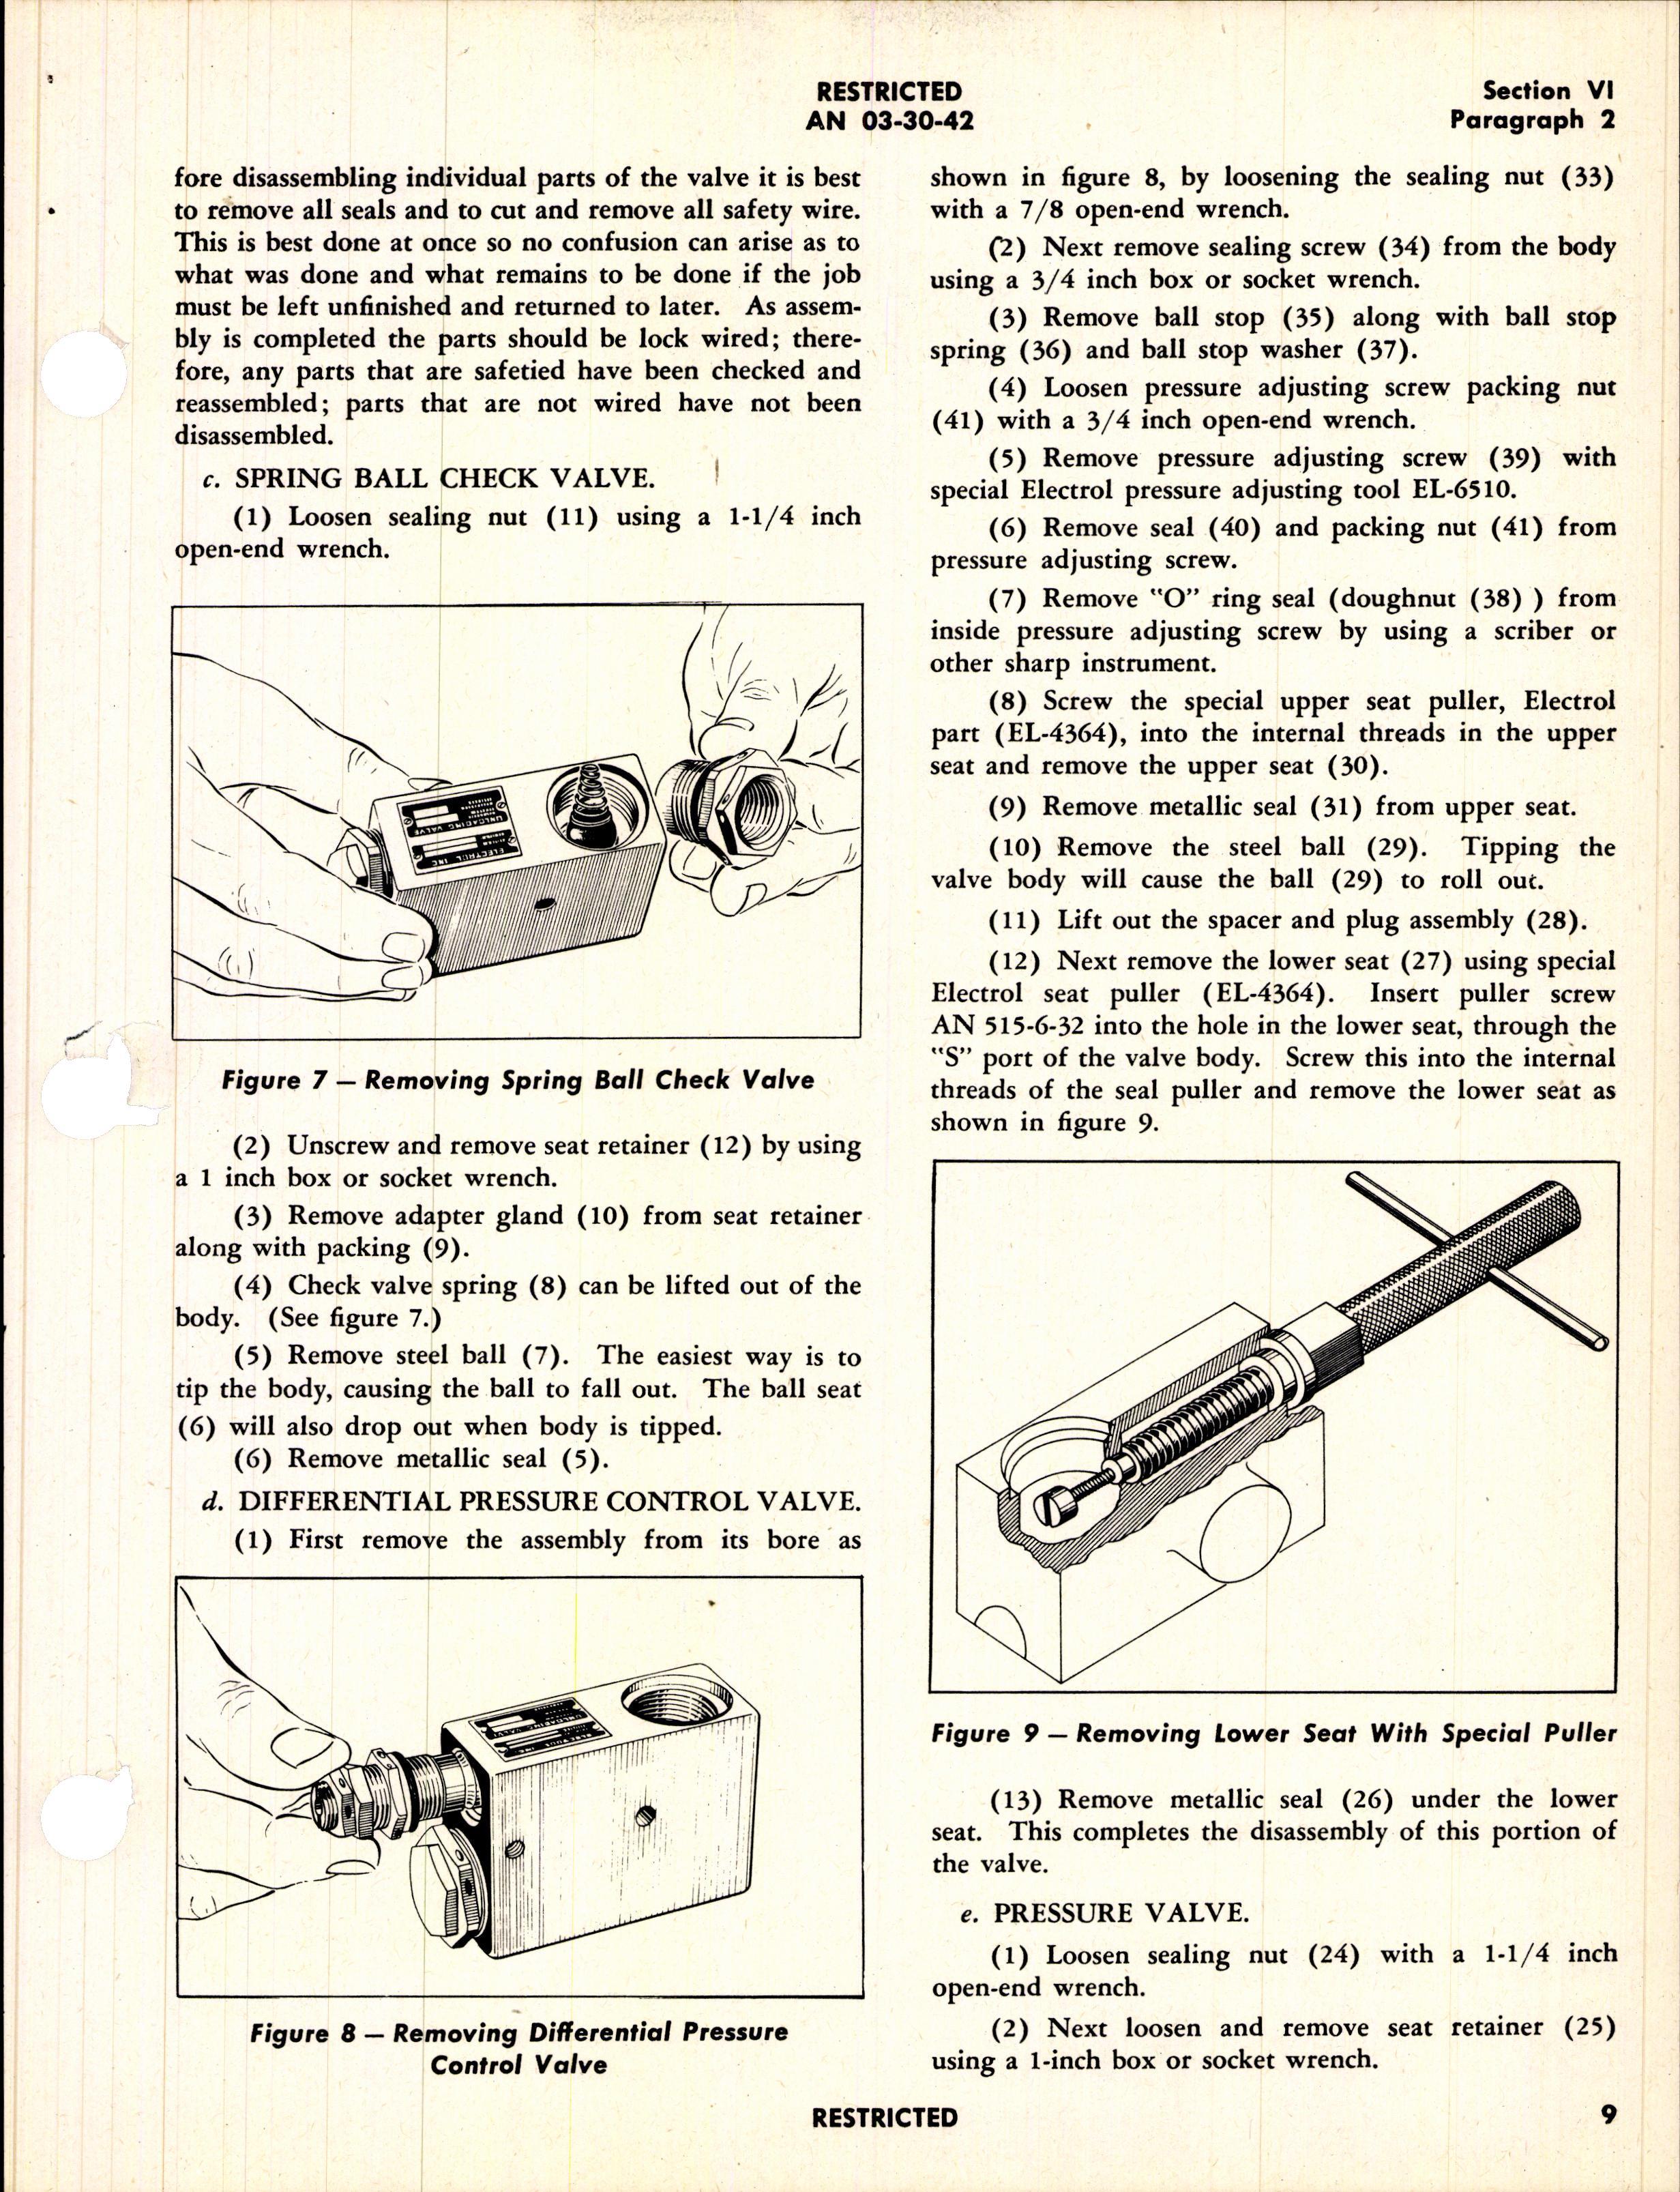 Sample page 13 from AirCorps Library document: Handbook of Instructions with Parts Catalog for Unloading Valves